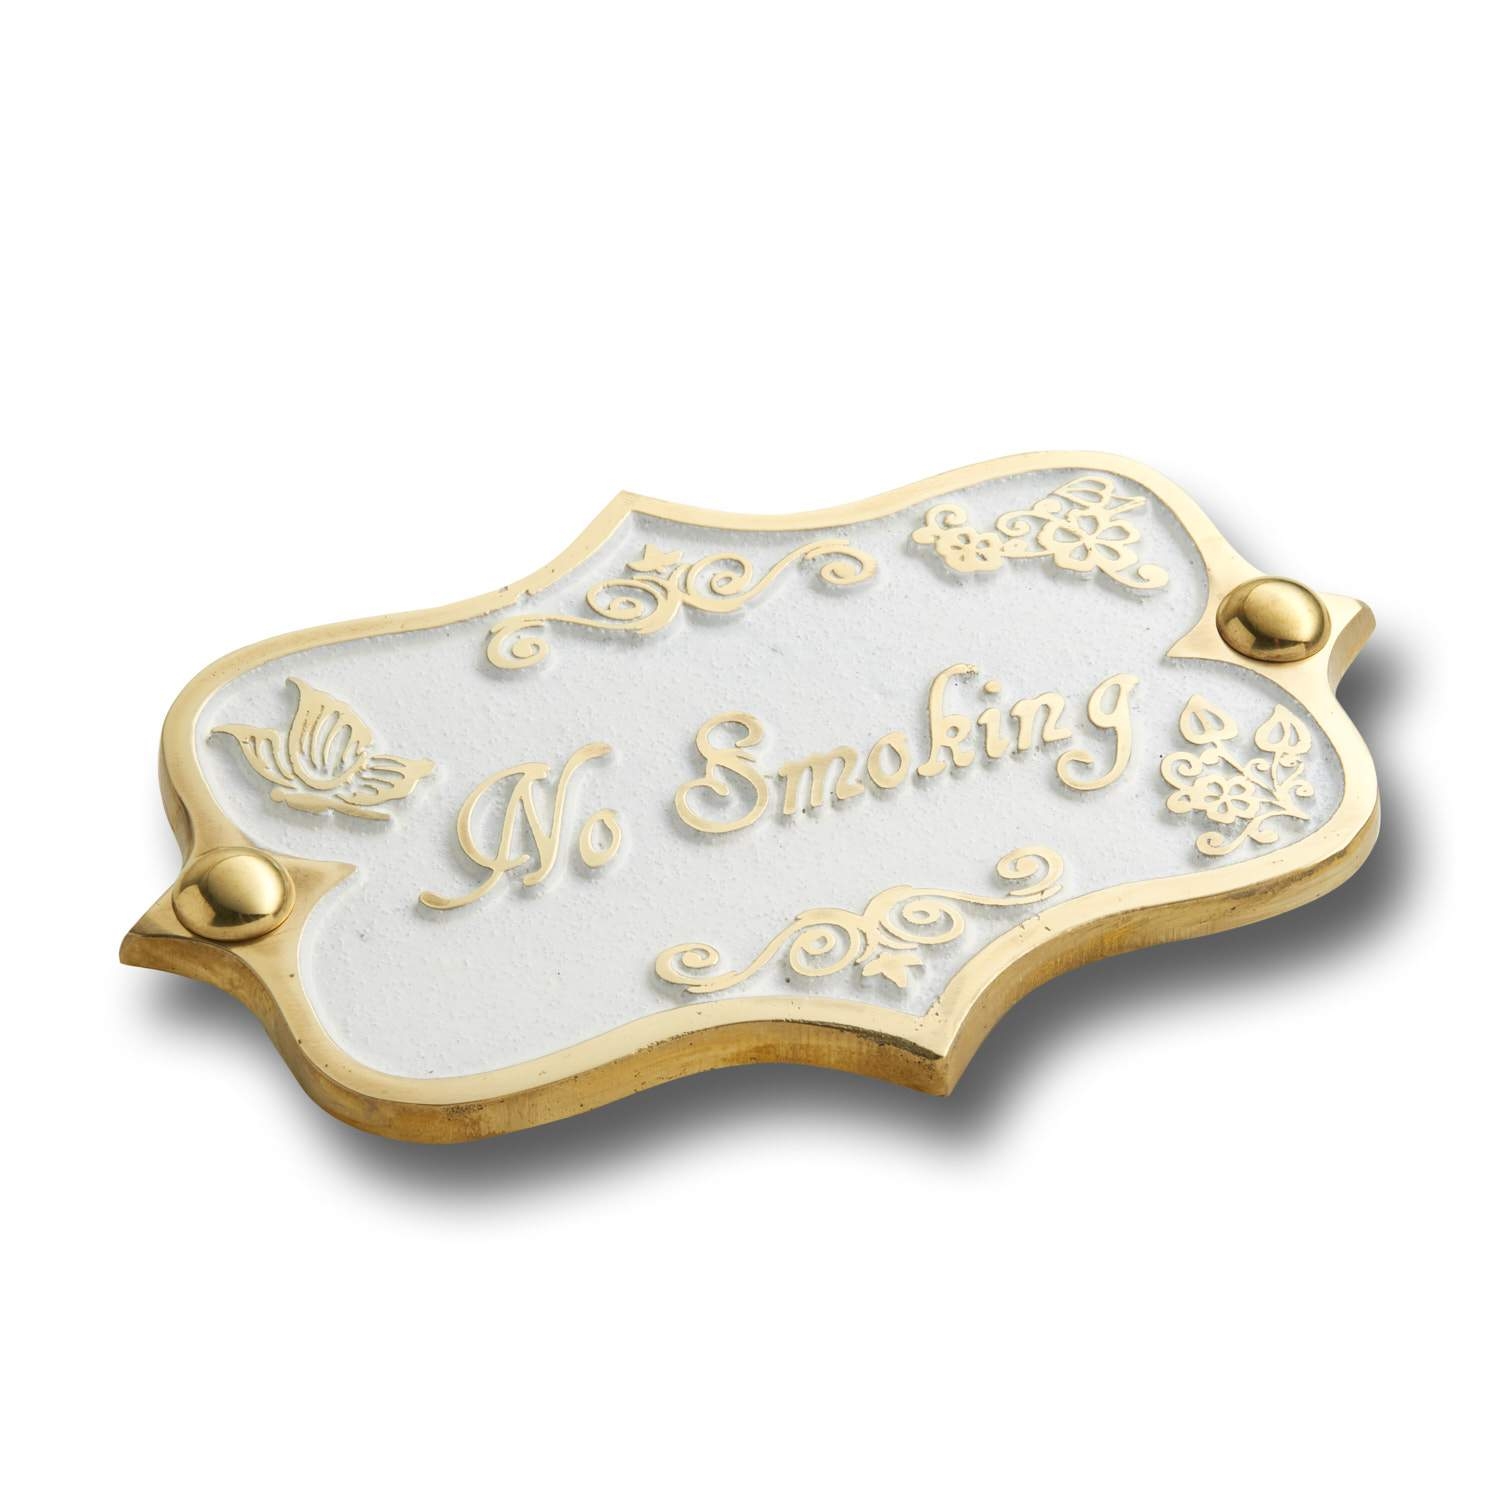 No Smoking Brass Door Sign.  Vintage Shabby Chic Style Home Décor Wall Plaque